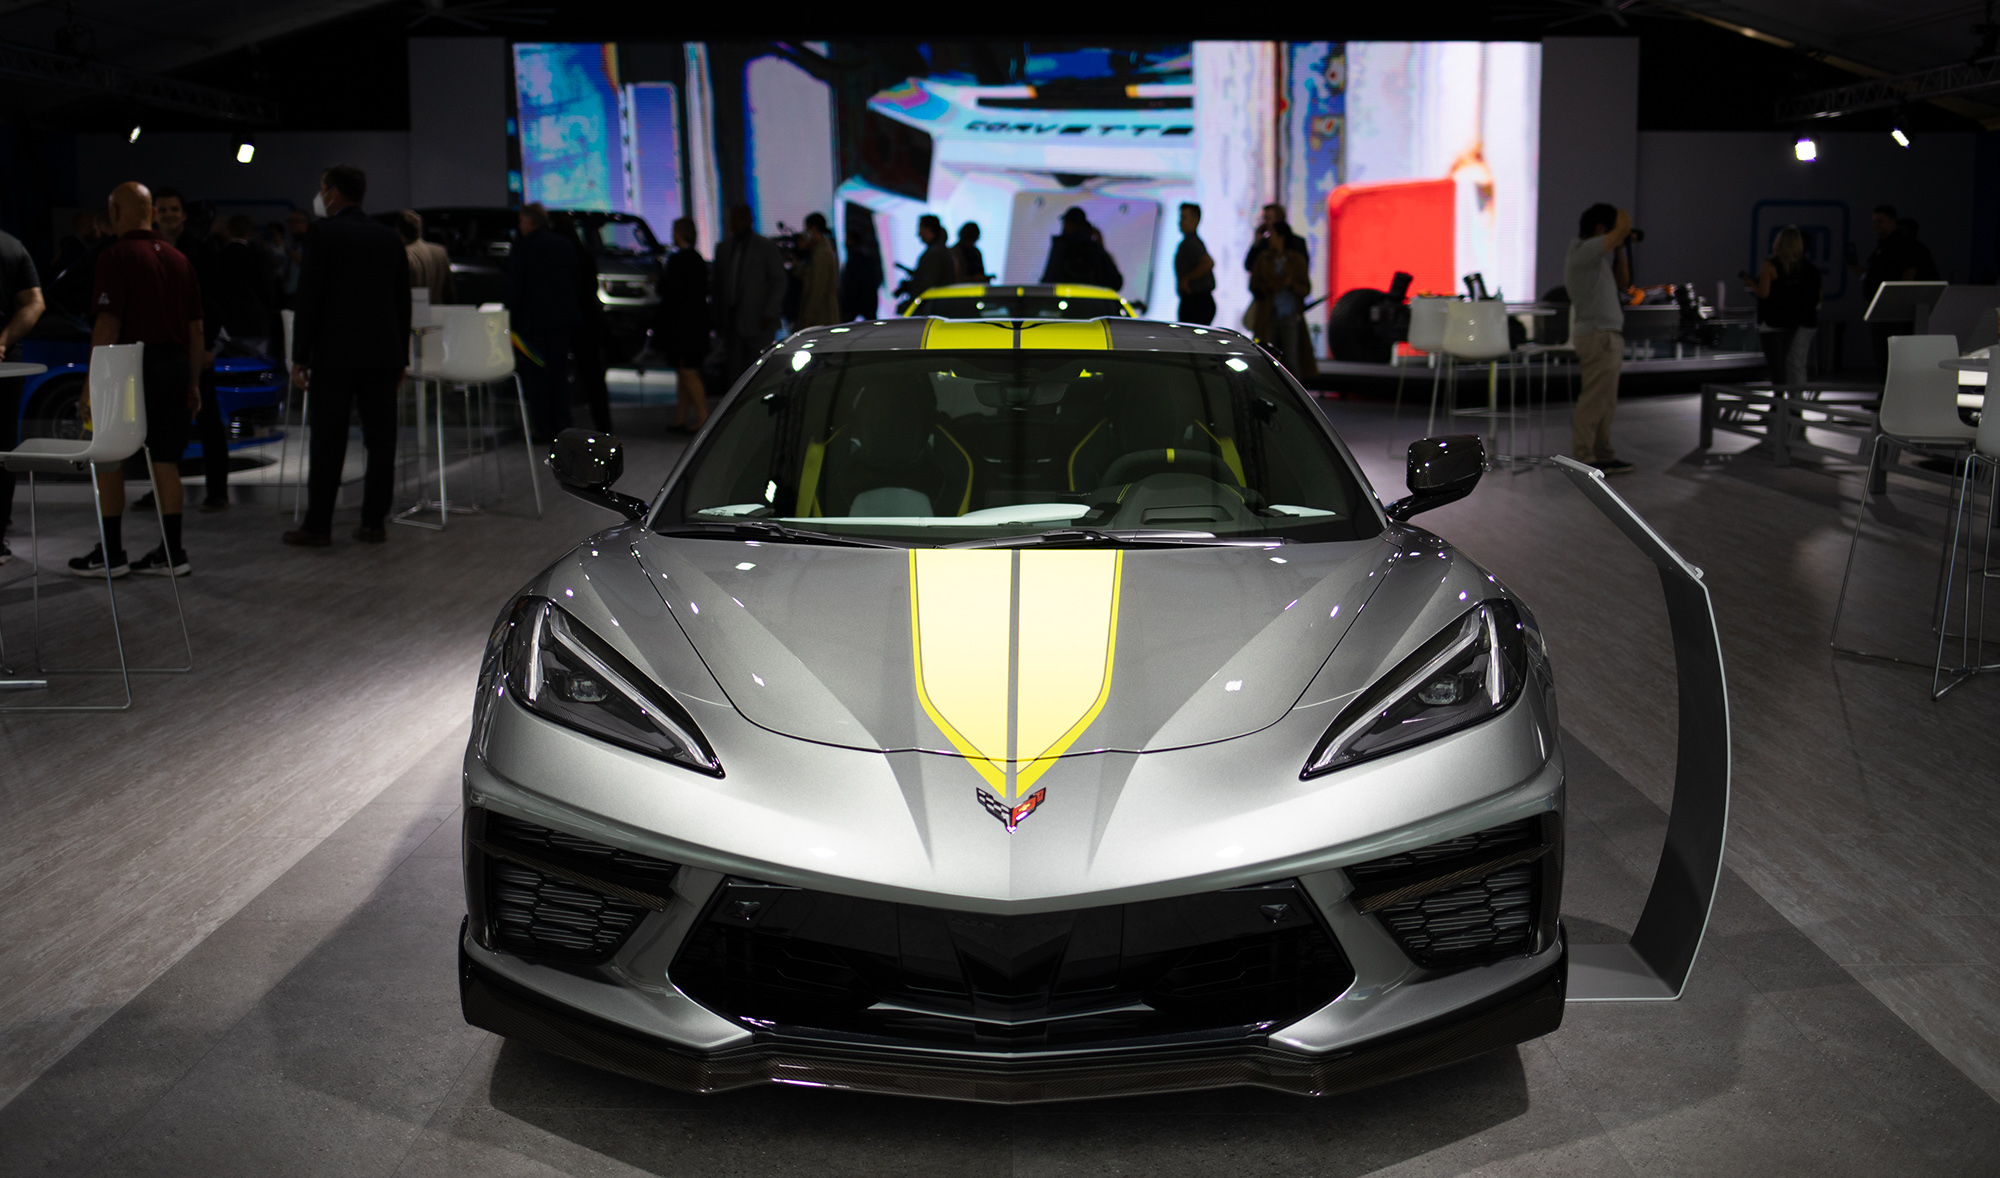 A Chevrolet Corvette on display during the Motor Bella Auto Show in Pontiac, Michigan, in Sept. 2021.&nbsp;